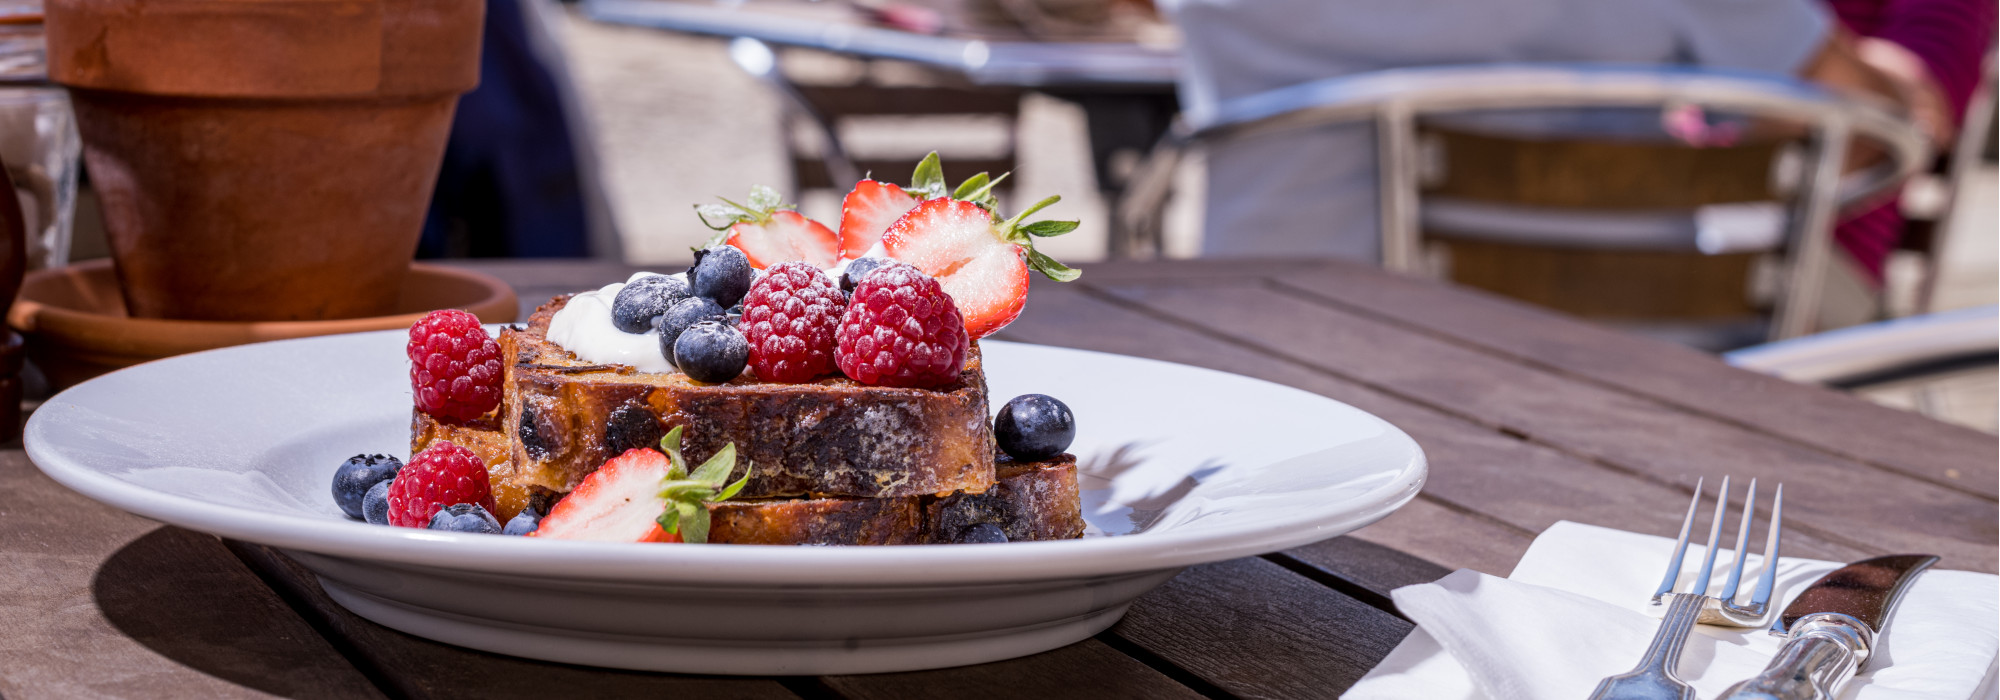 French toast with cream and berries